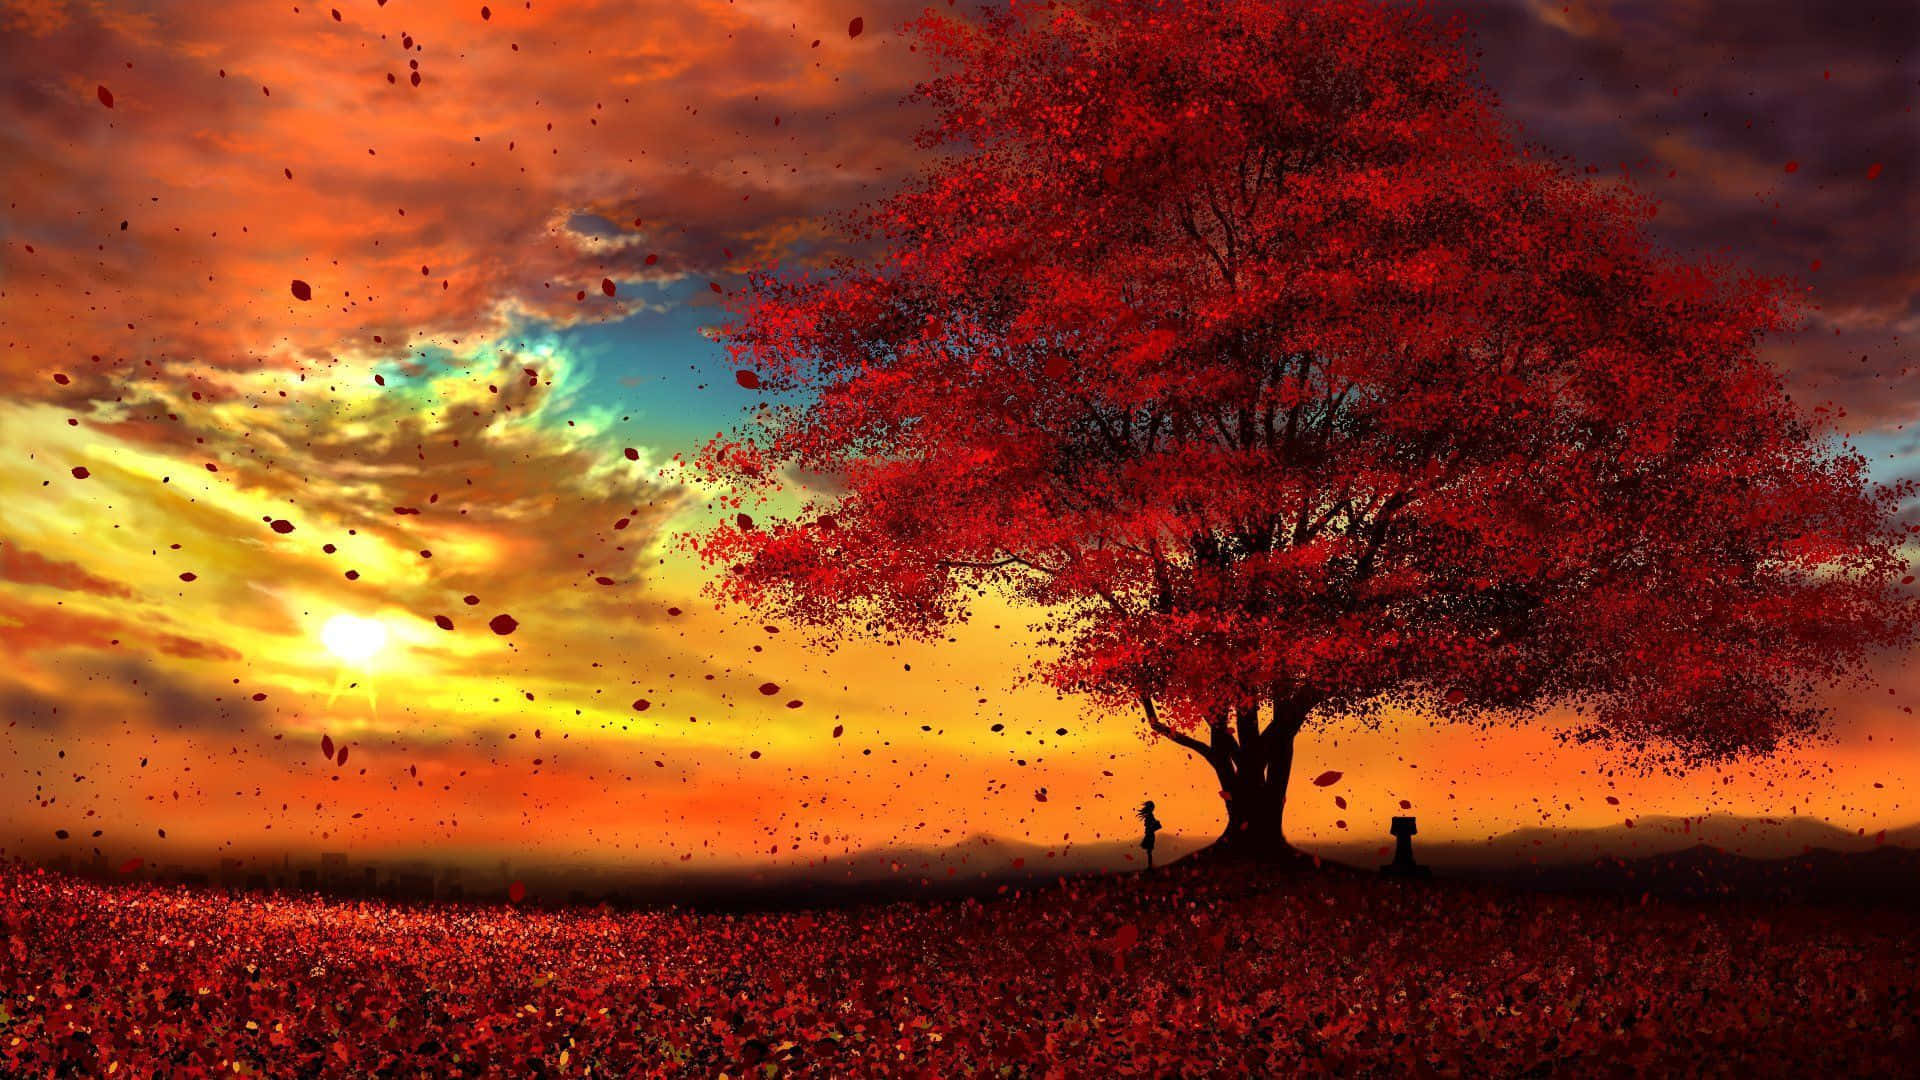 Anime Girl with Orange Leaves Autumn Wallpaper - Fall Wallpapers